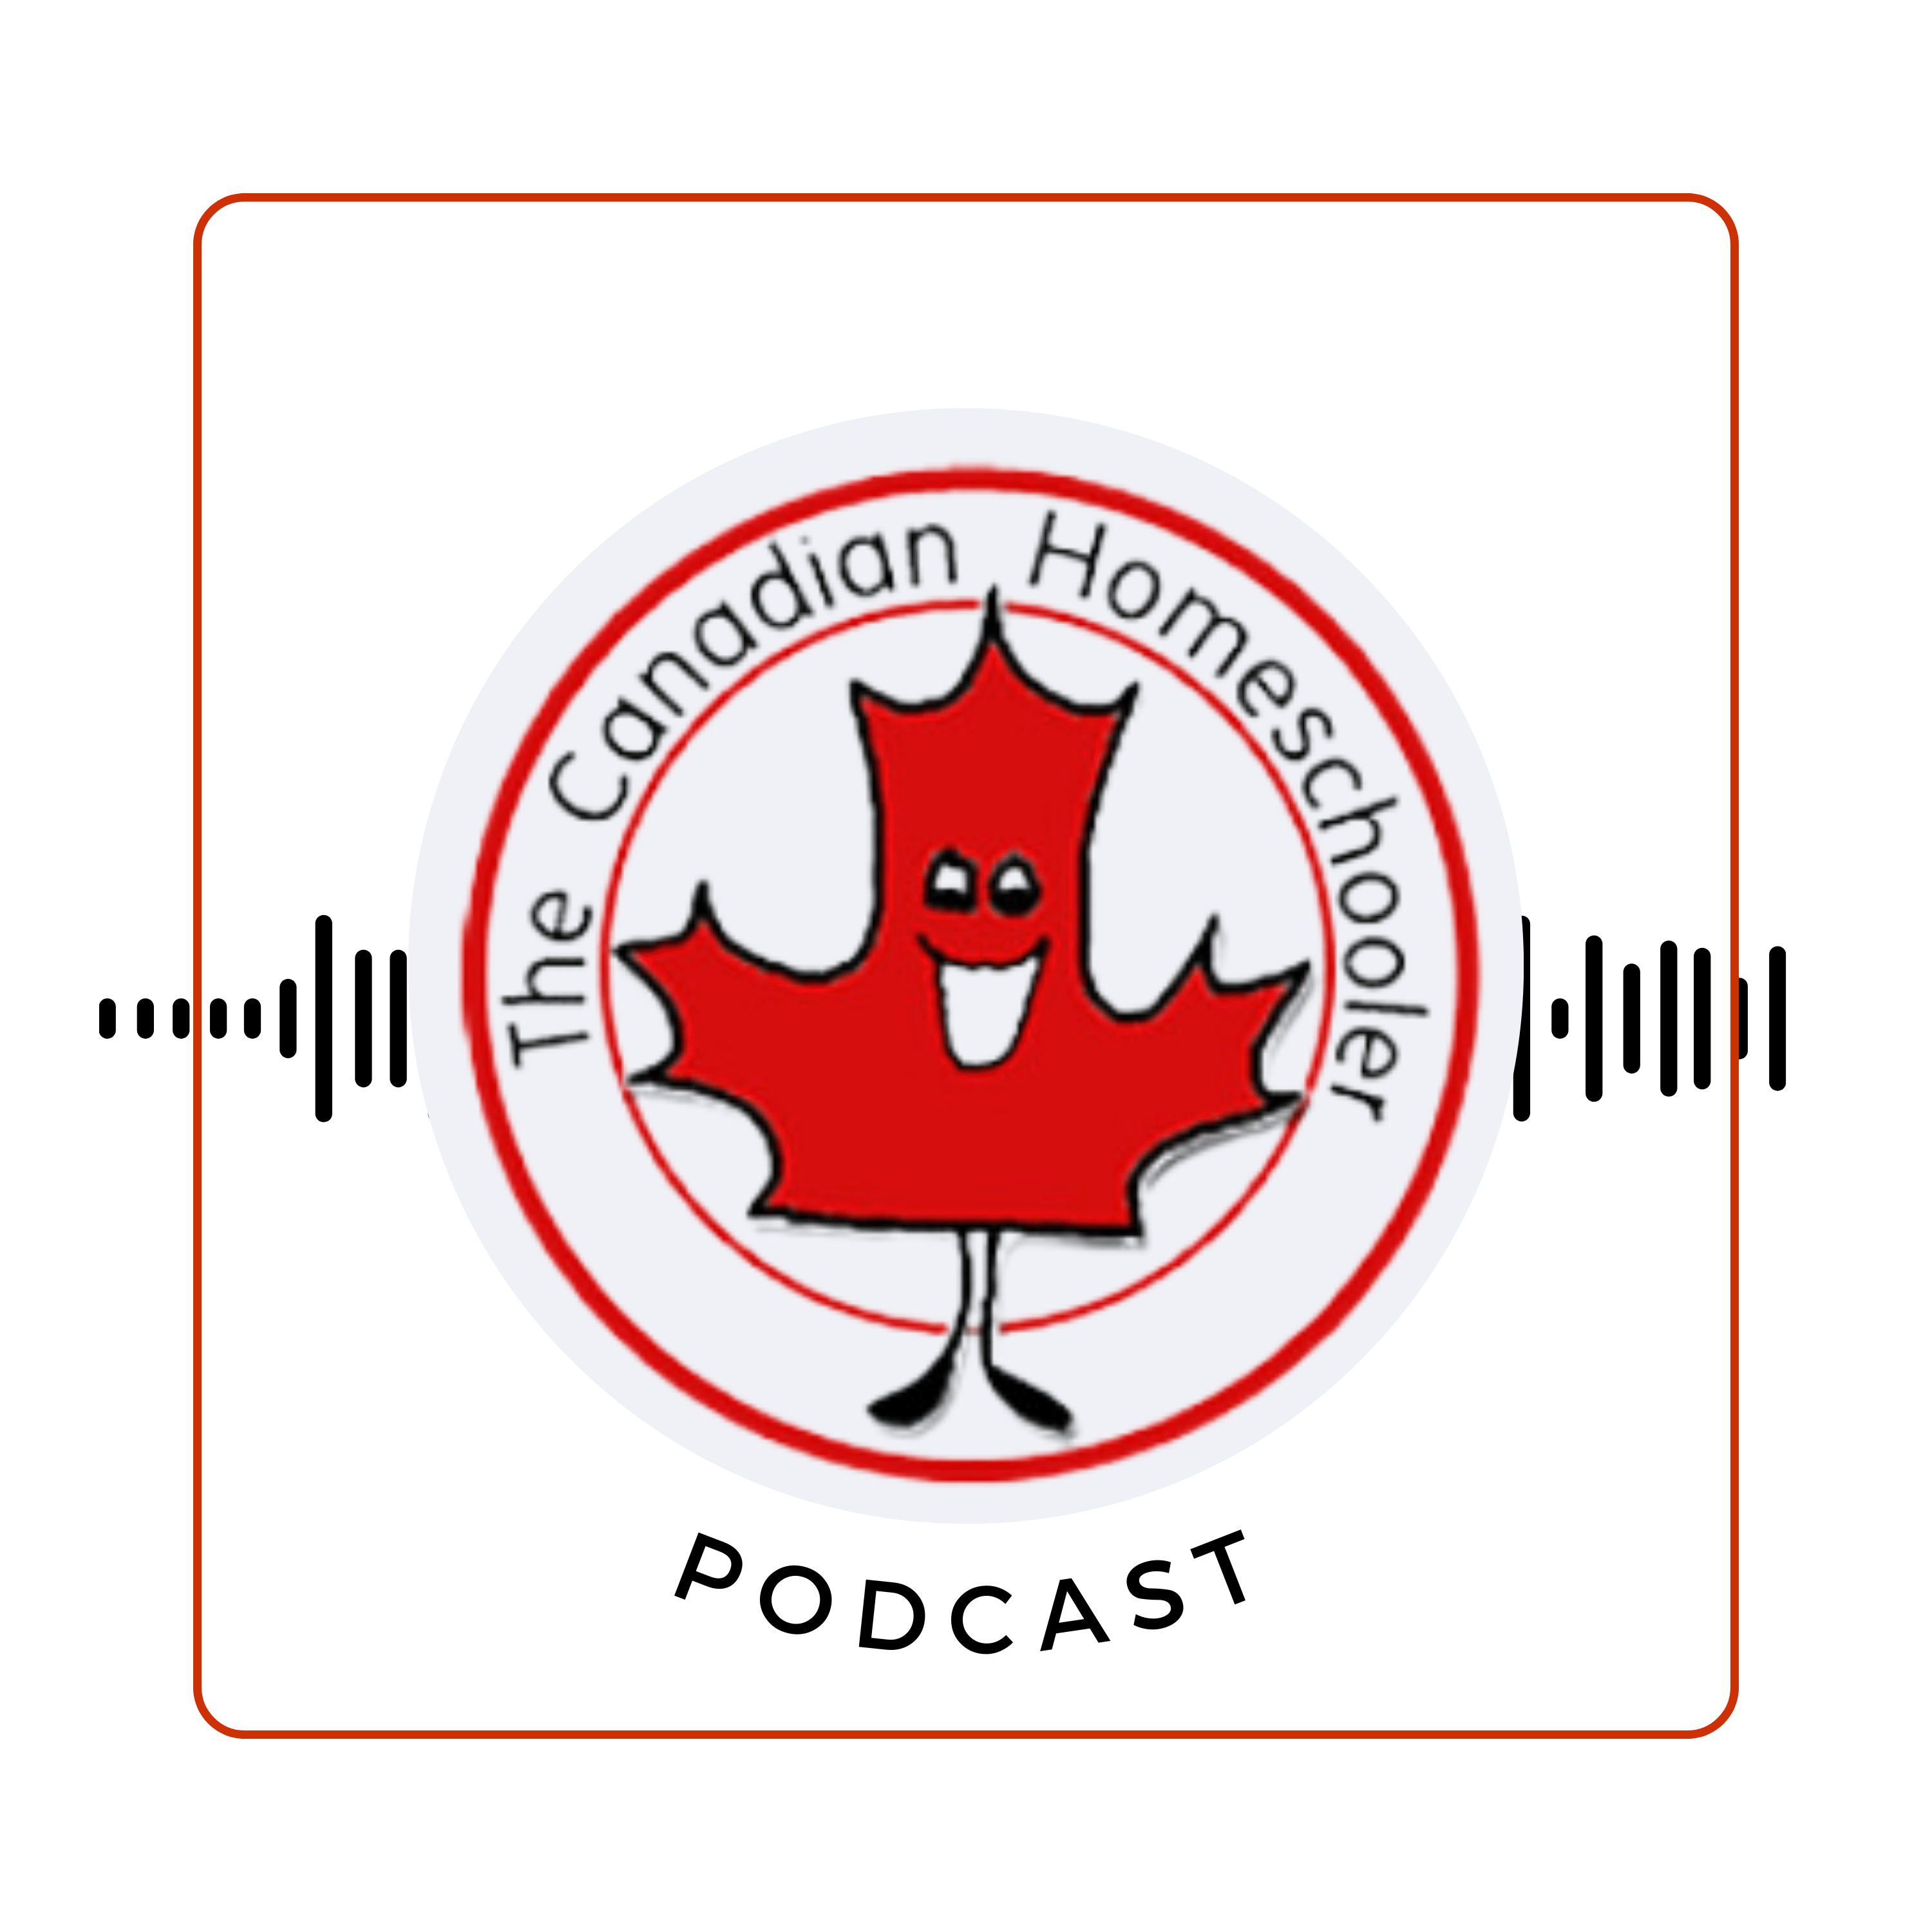 The Canadian Homeschooler Podcast Cover with a red cartoon maple leaf